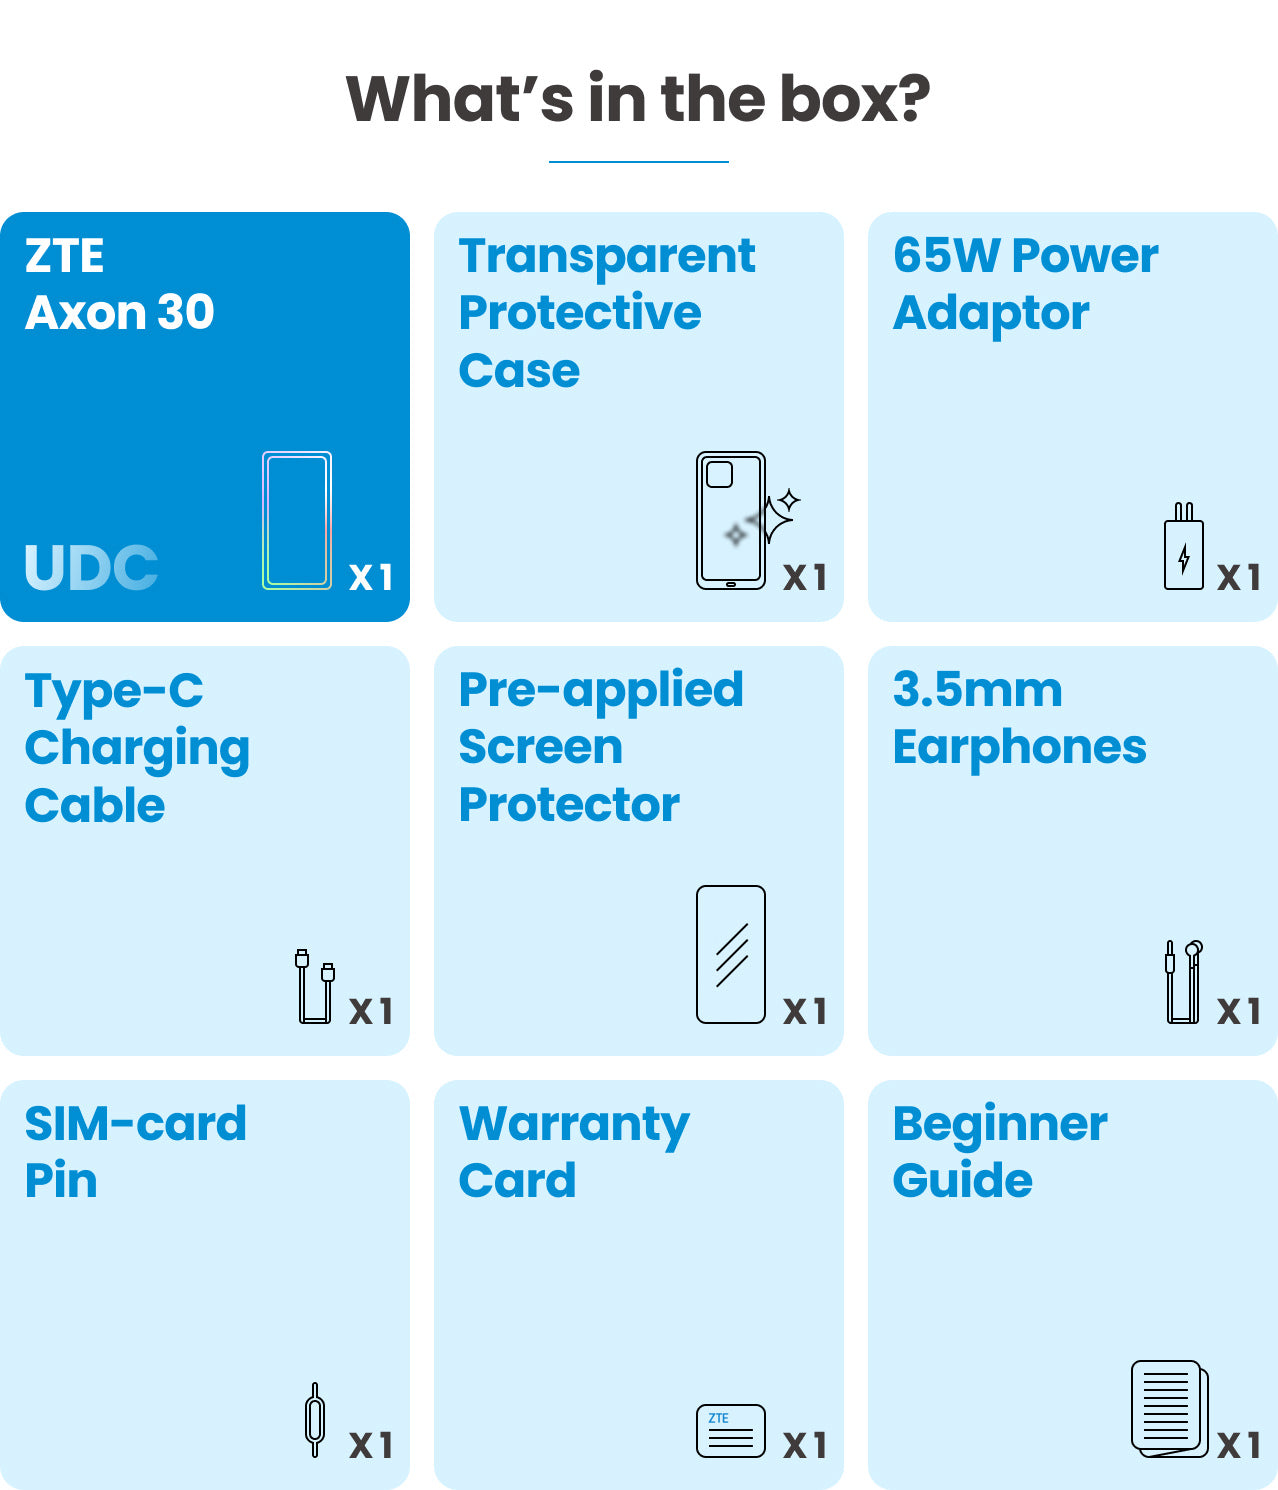 What’s in the box: 1/ One ZTE Axon 30 UDC Phone; 2/ One Transparent Protective Case; 3/One 65W Power Adaptor; 4/One Type-C Charging Cable; 5/ One Pre-applied Screen Protector; 6/ One  3.5mm Earphones; 7/ One SIM-card Pin; 8/ One Warranty Card; 9/ One Beginner Guide